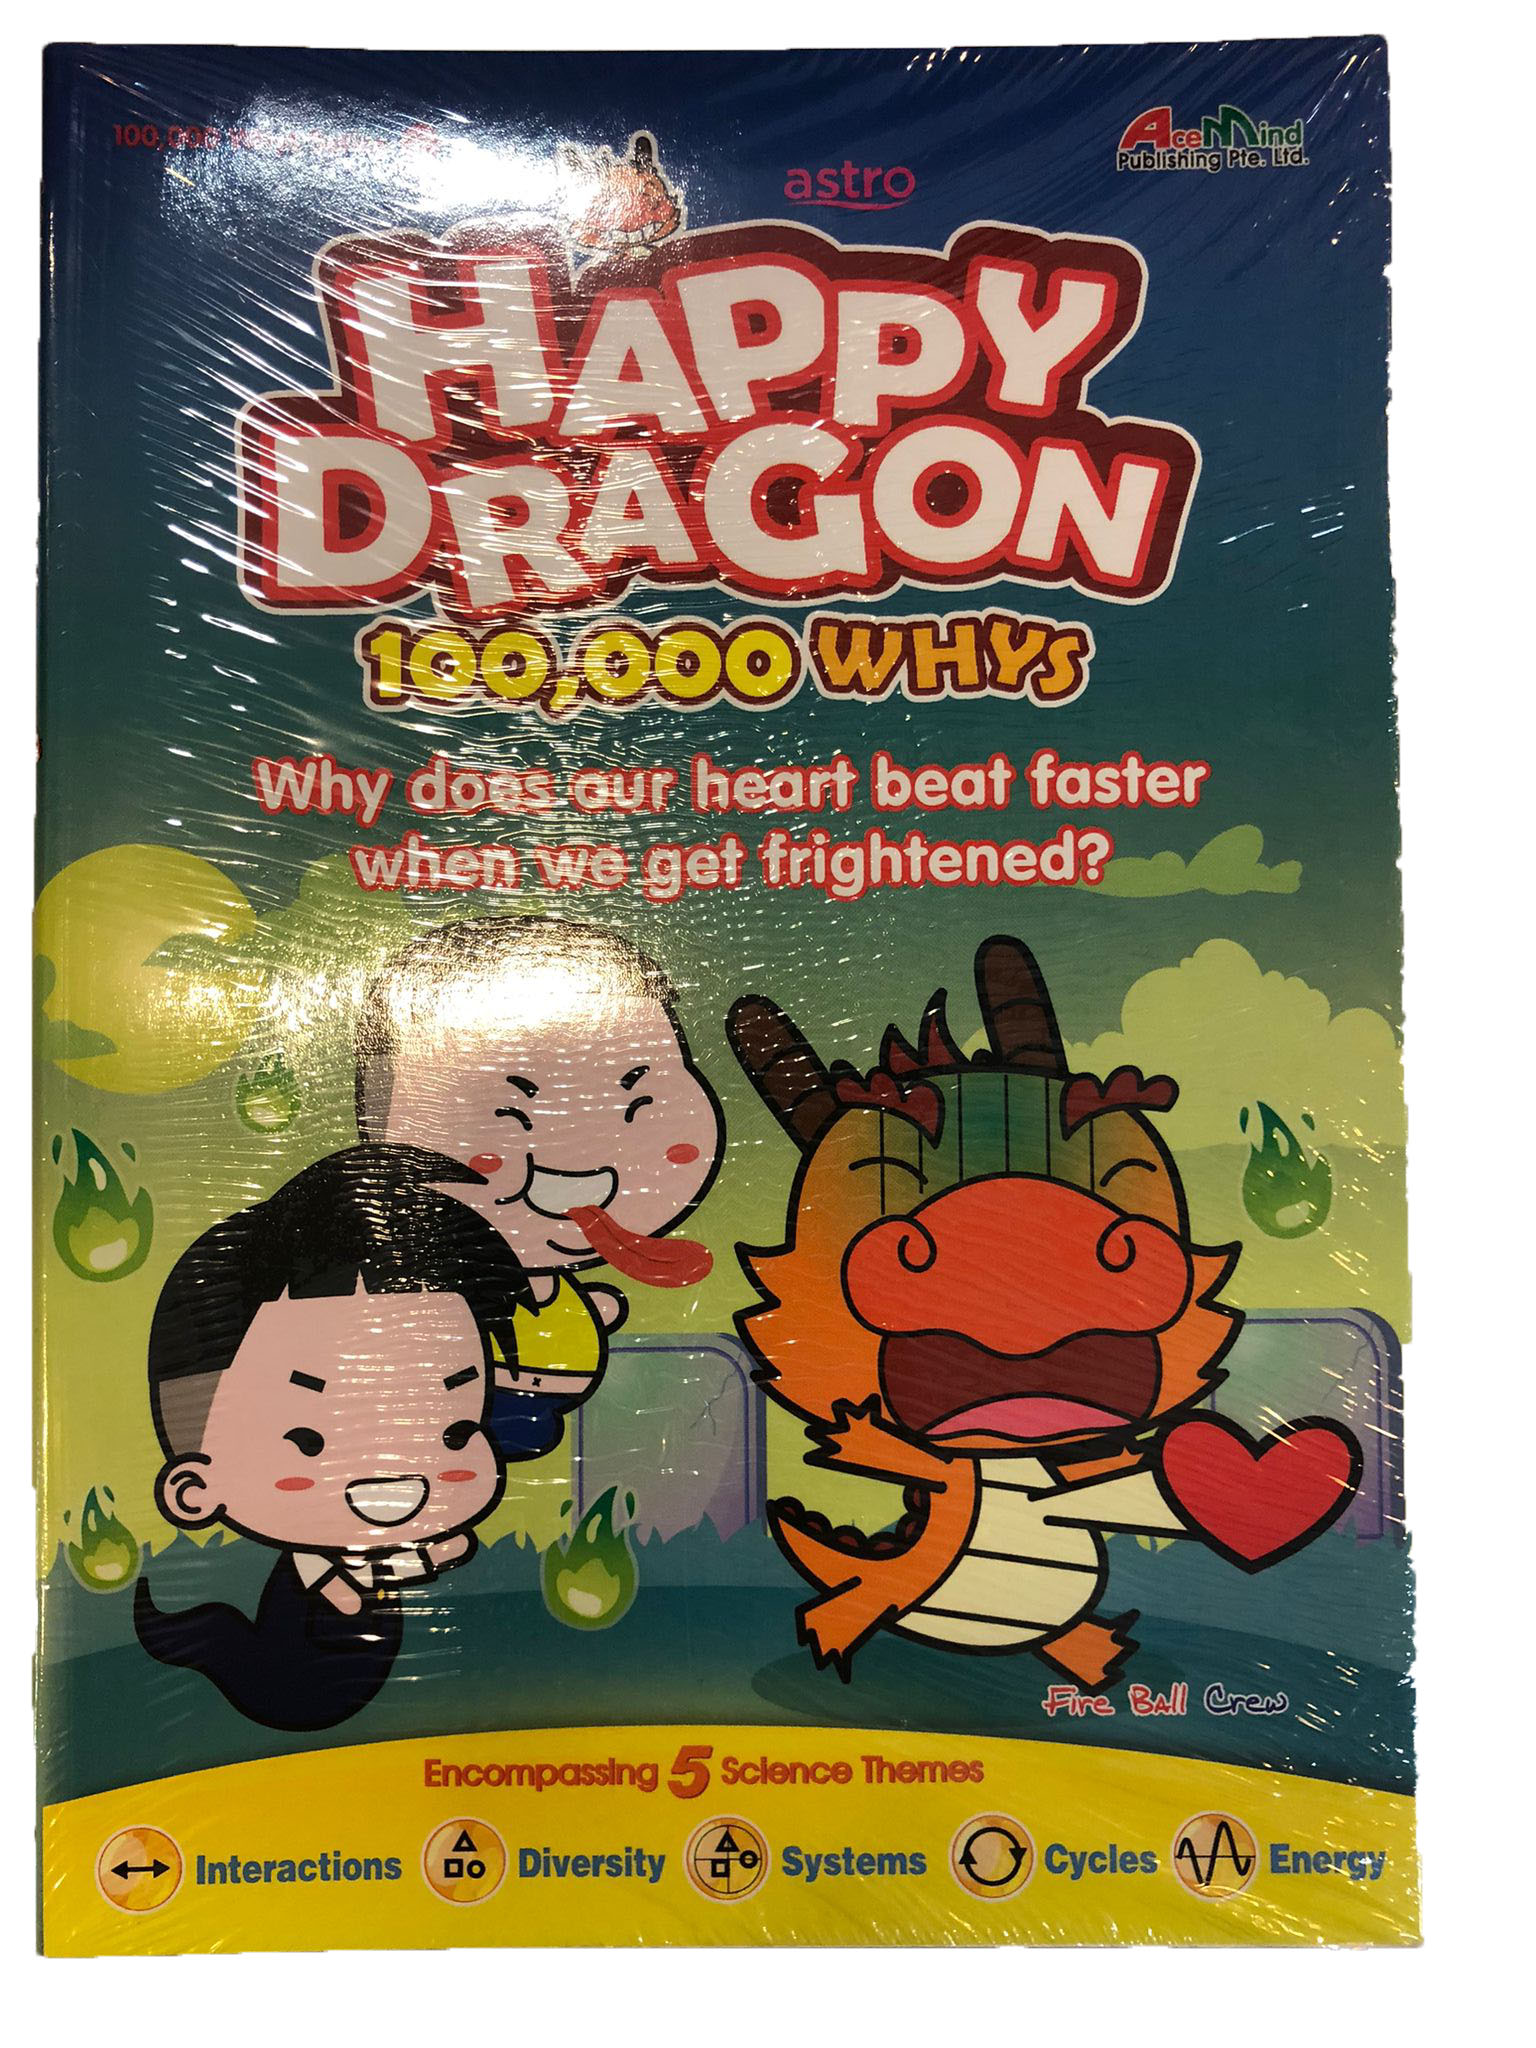 Happy Dragon #33 Why does our heart beat faster when we get frightened?